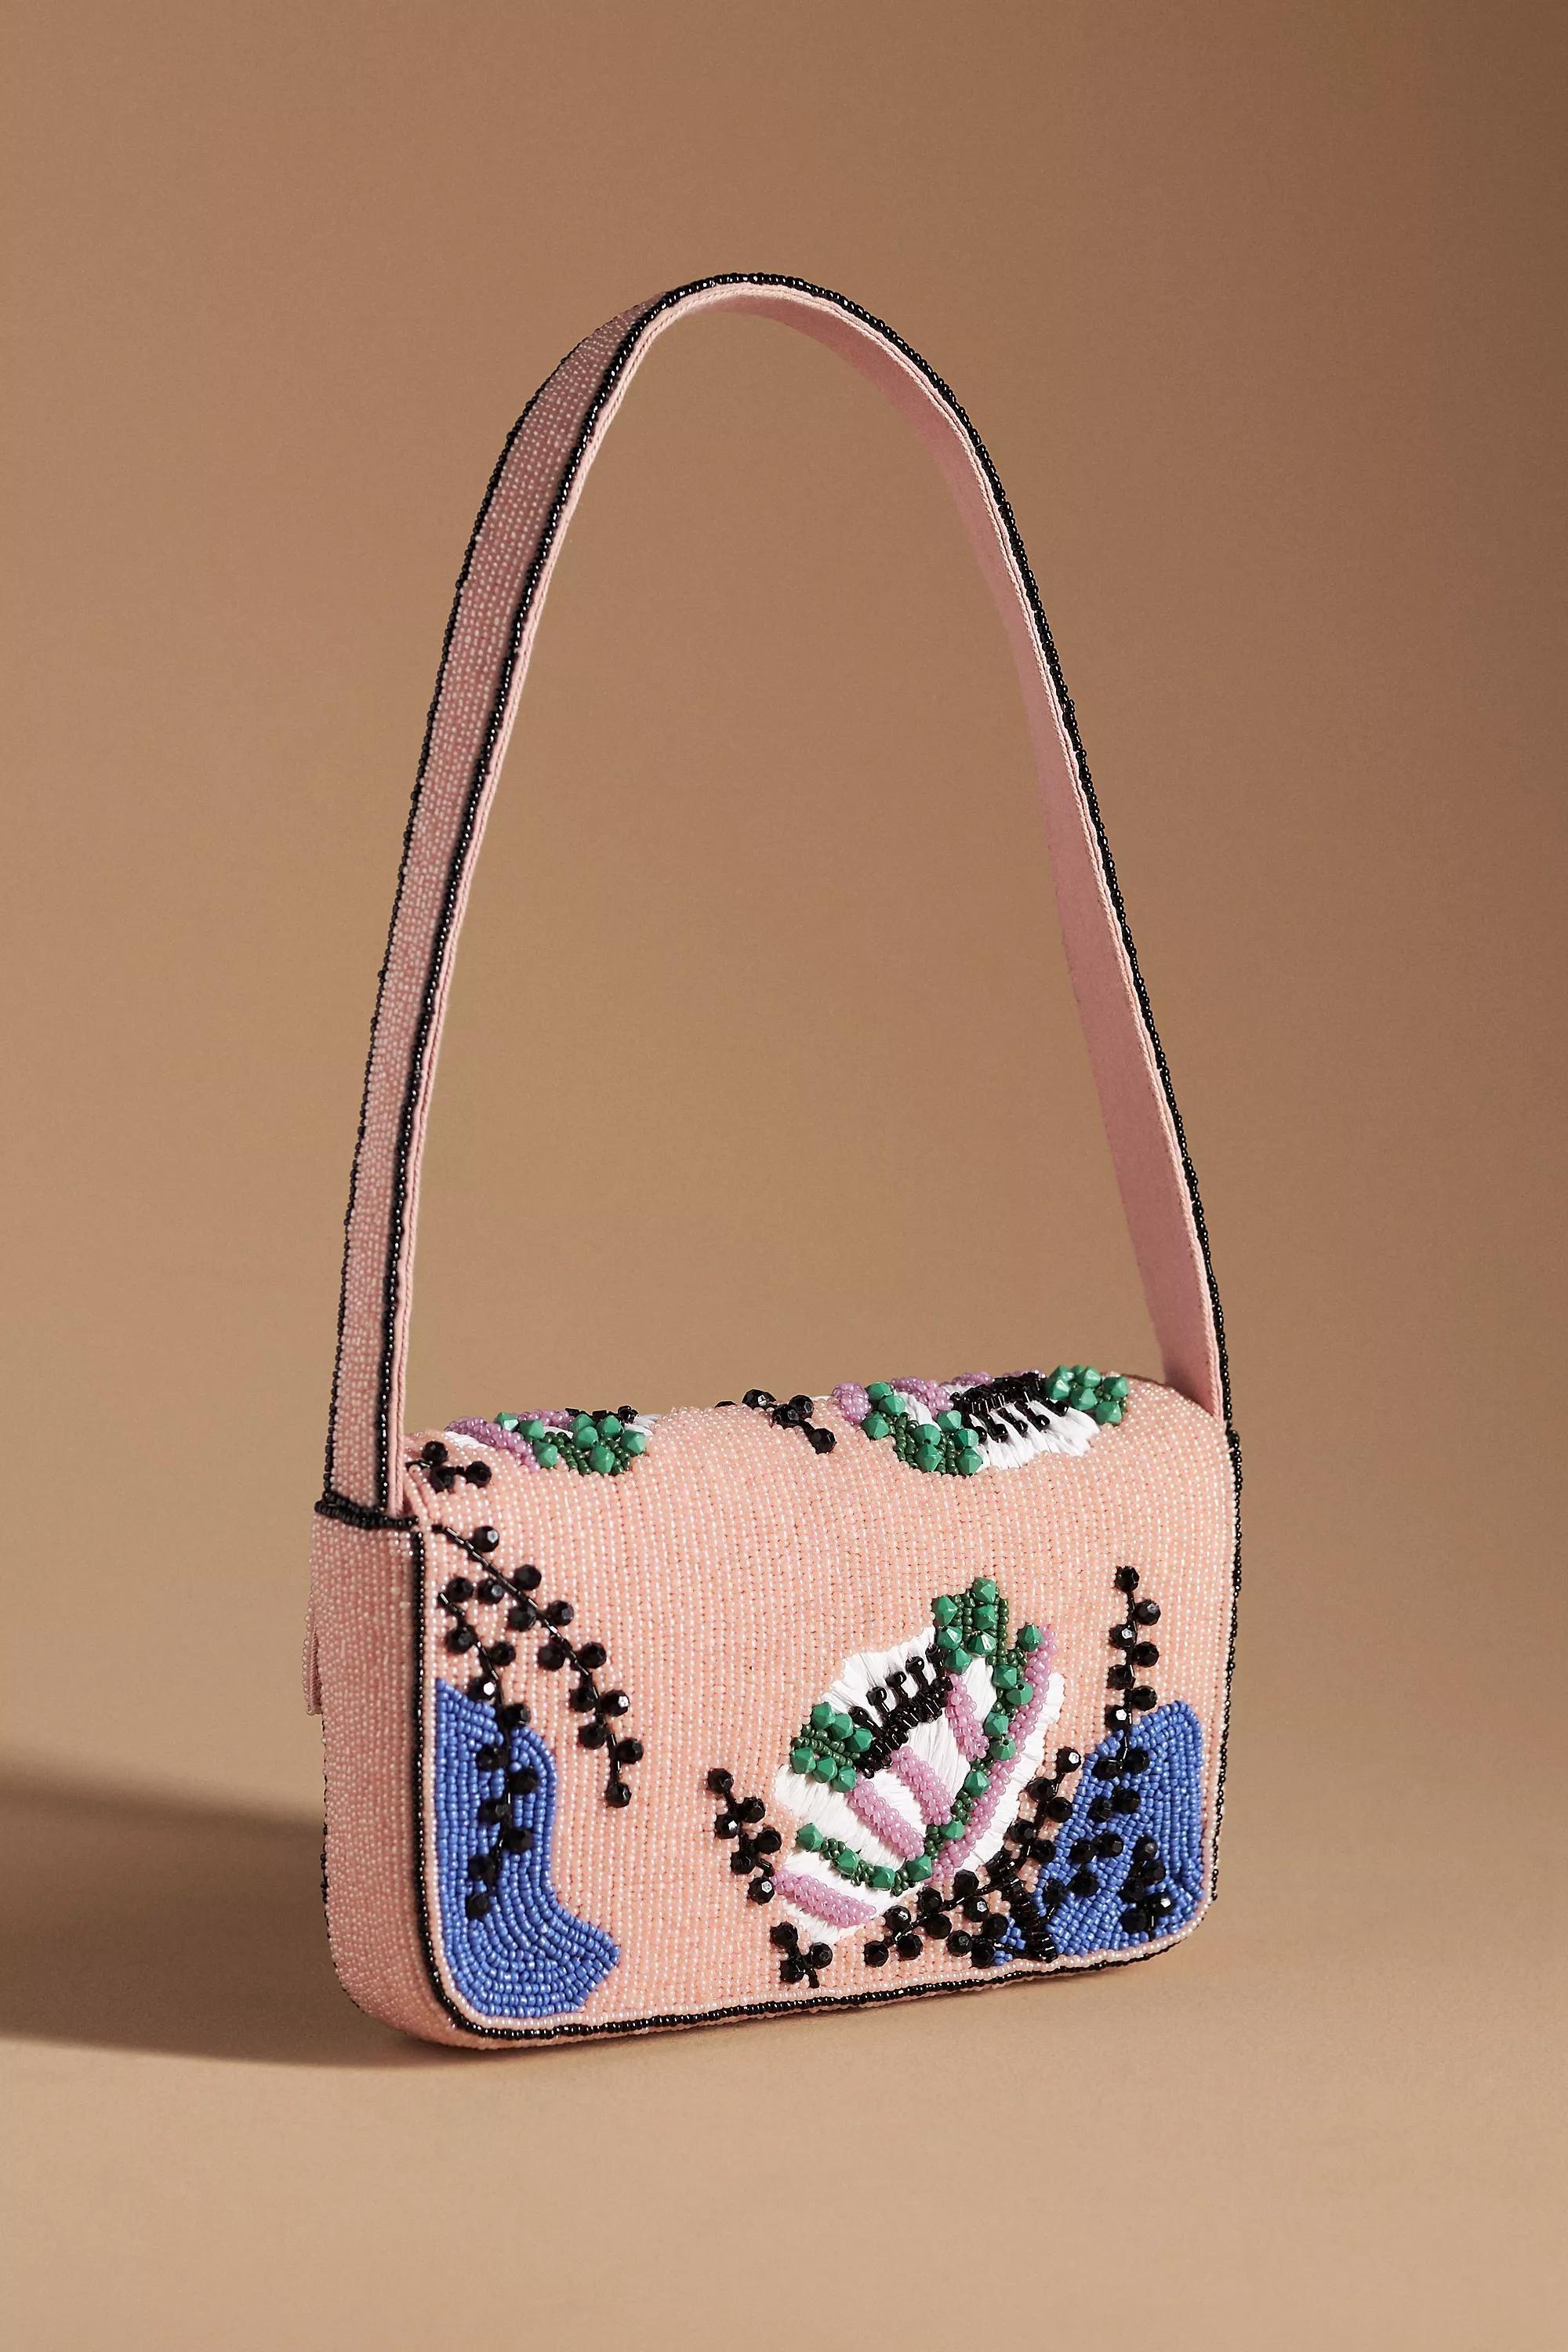 Anthropologie - The Fiona Beaded Bag: Bloom Edition, Pink